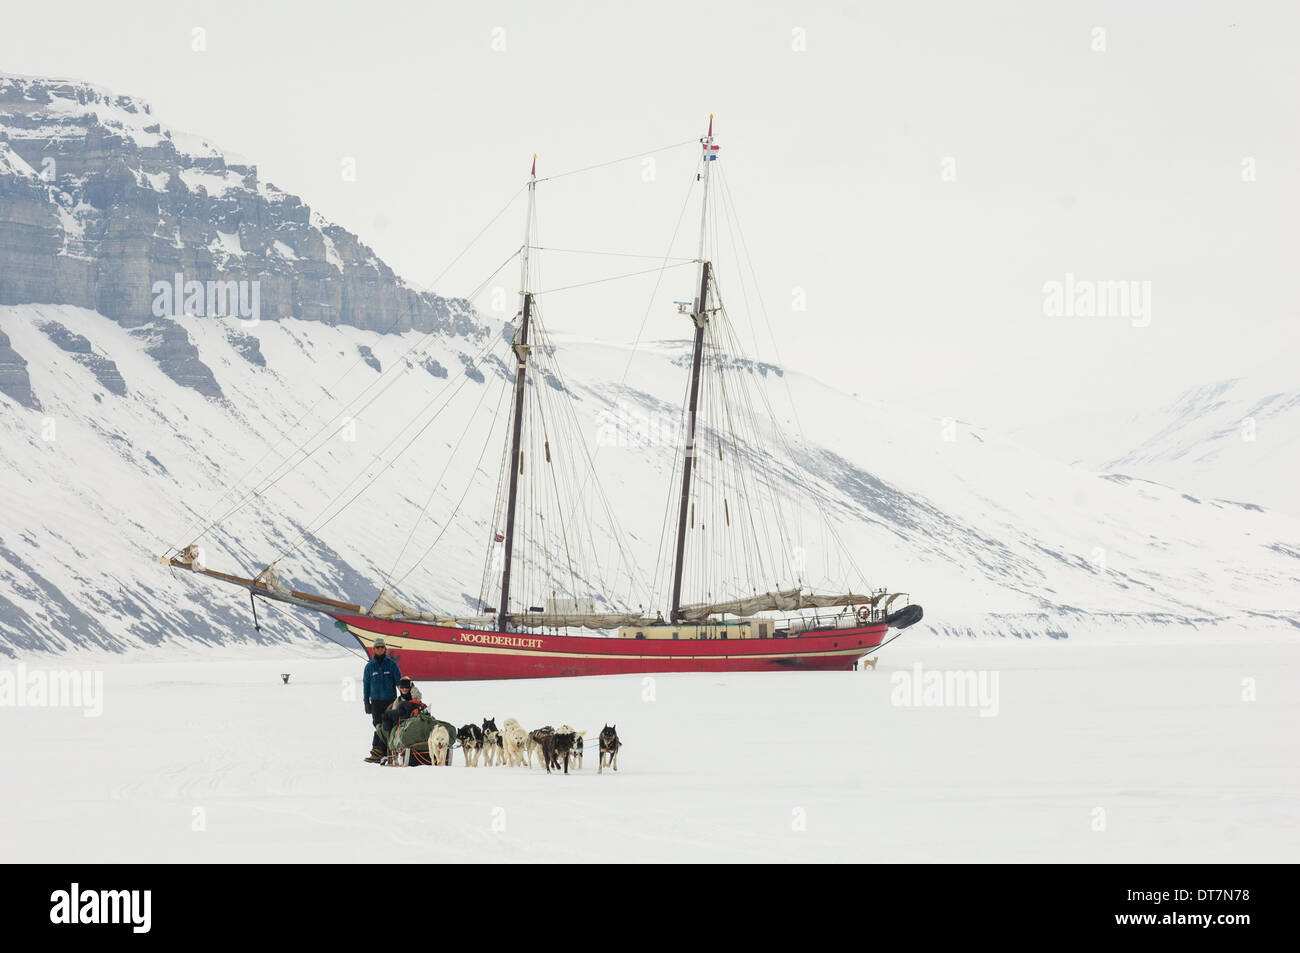 Dog sled team racing away from the Noorderlicht 'Ship in the Ice', Temple Fjord (Tempelfjorden), Spitsbergen, Svalbard Archipelago, Norway Stock Photo